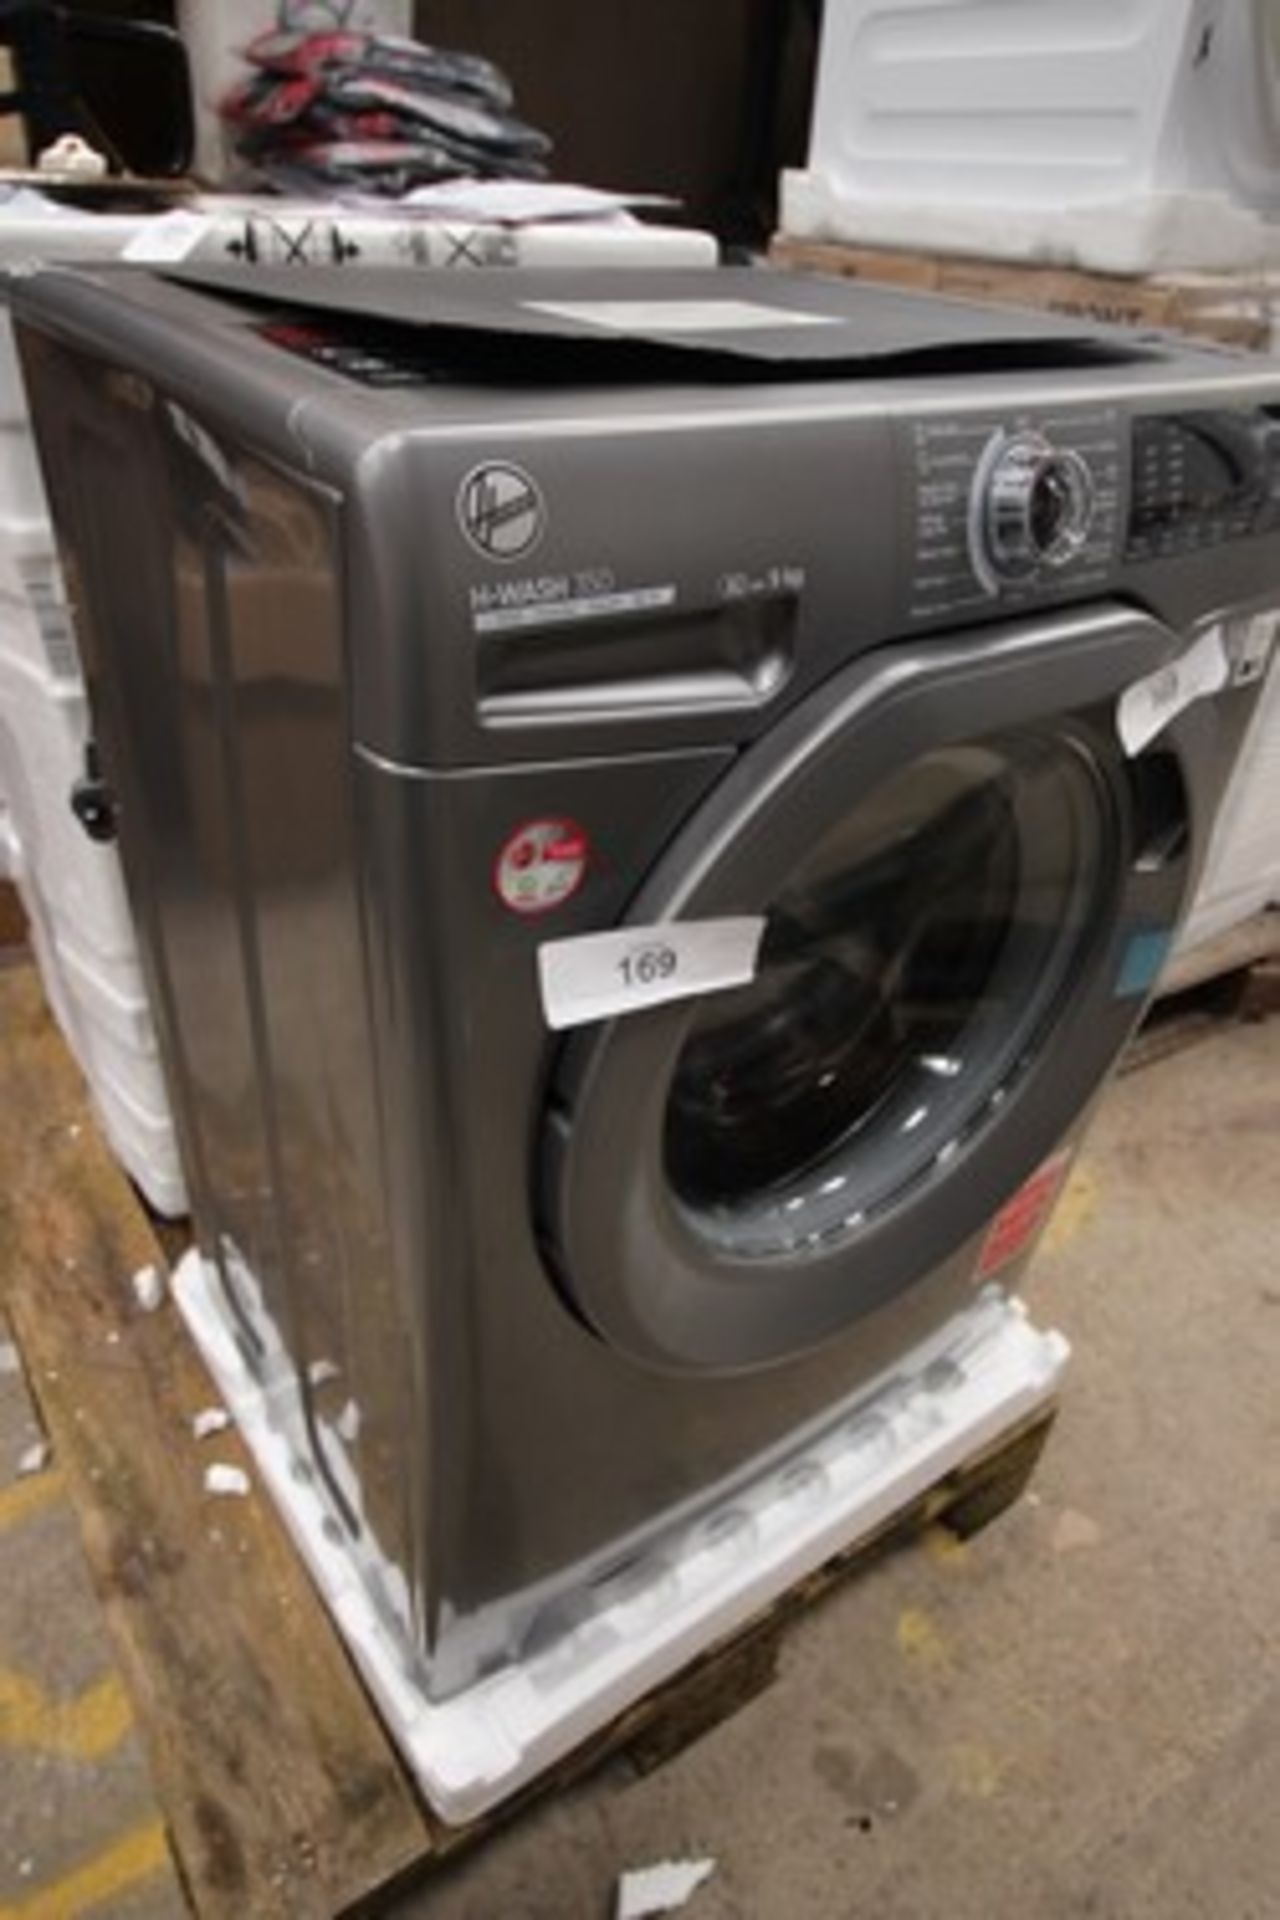 1 x Hoover H Wash 350 9kg washing machine, Model H3WP5496TMRR6, scratched to top of left panel and